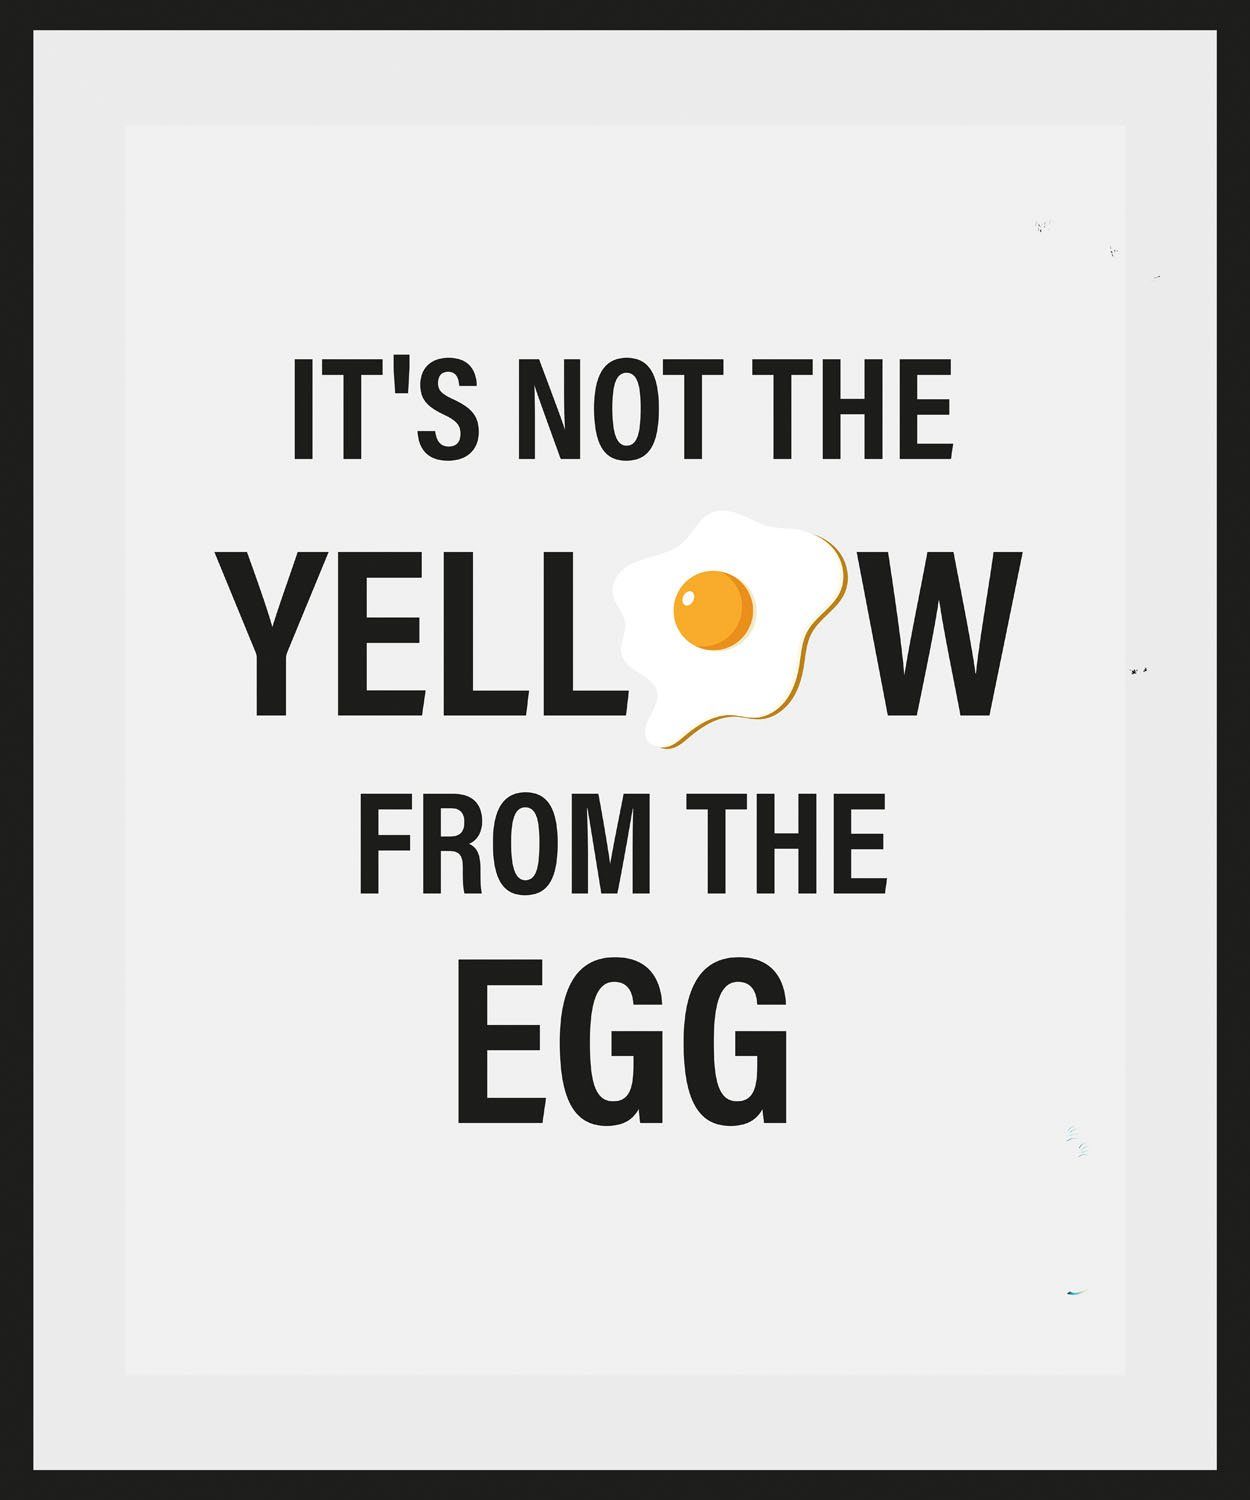 queence Wanddecoratie IT'S NOT THE YELLOW FROM THE EGG (1 stuk)